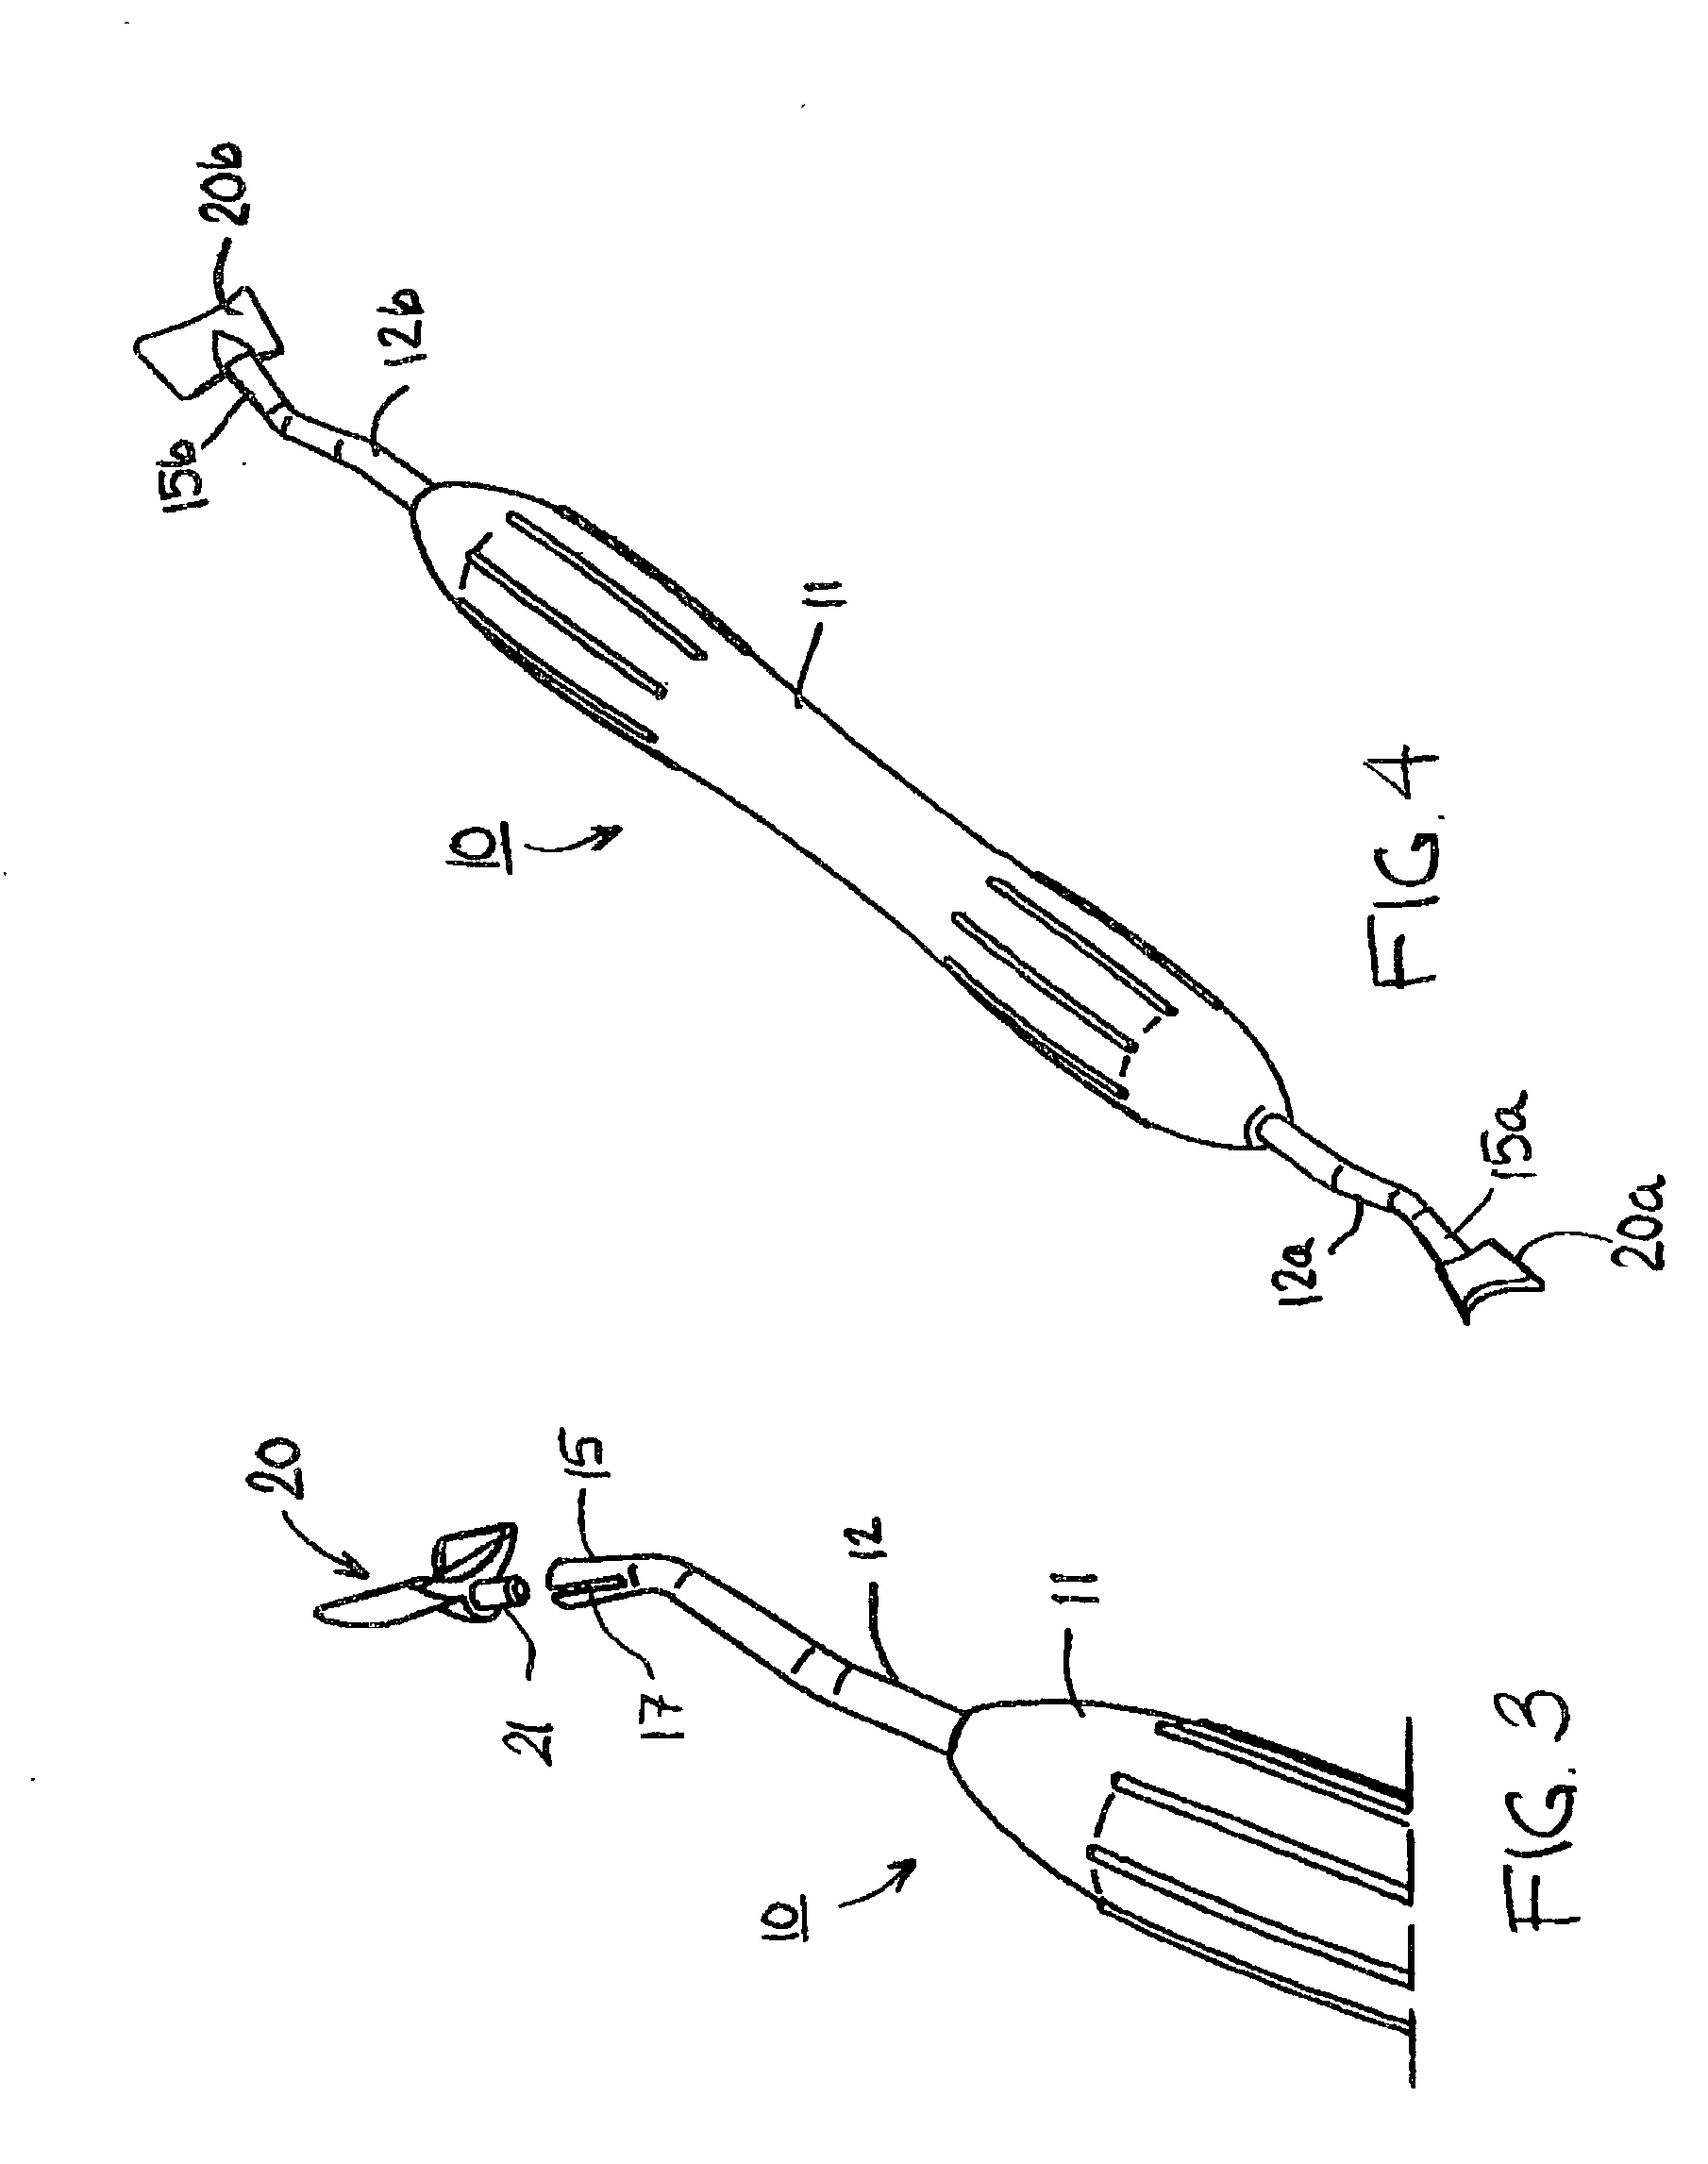 Dental hand instrument and tip of the instrument